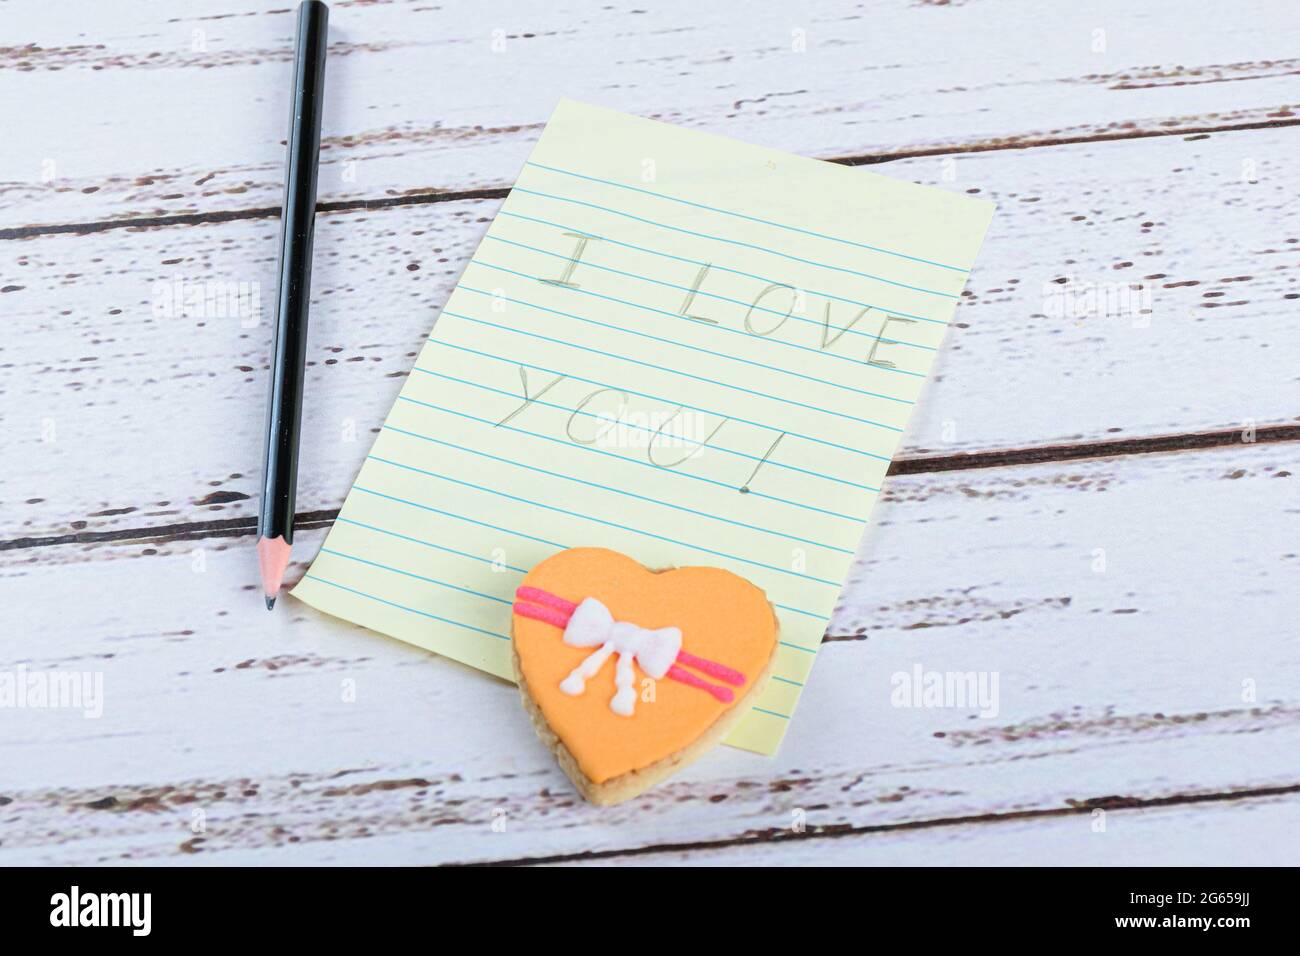 Notepad written I love you next to a pencil and a cookie. Stock Photo